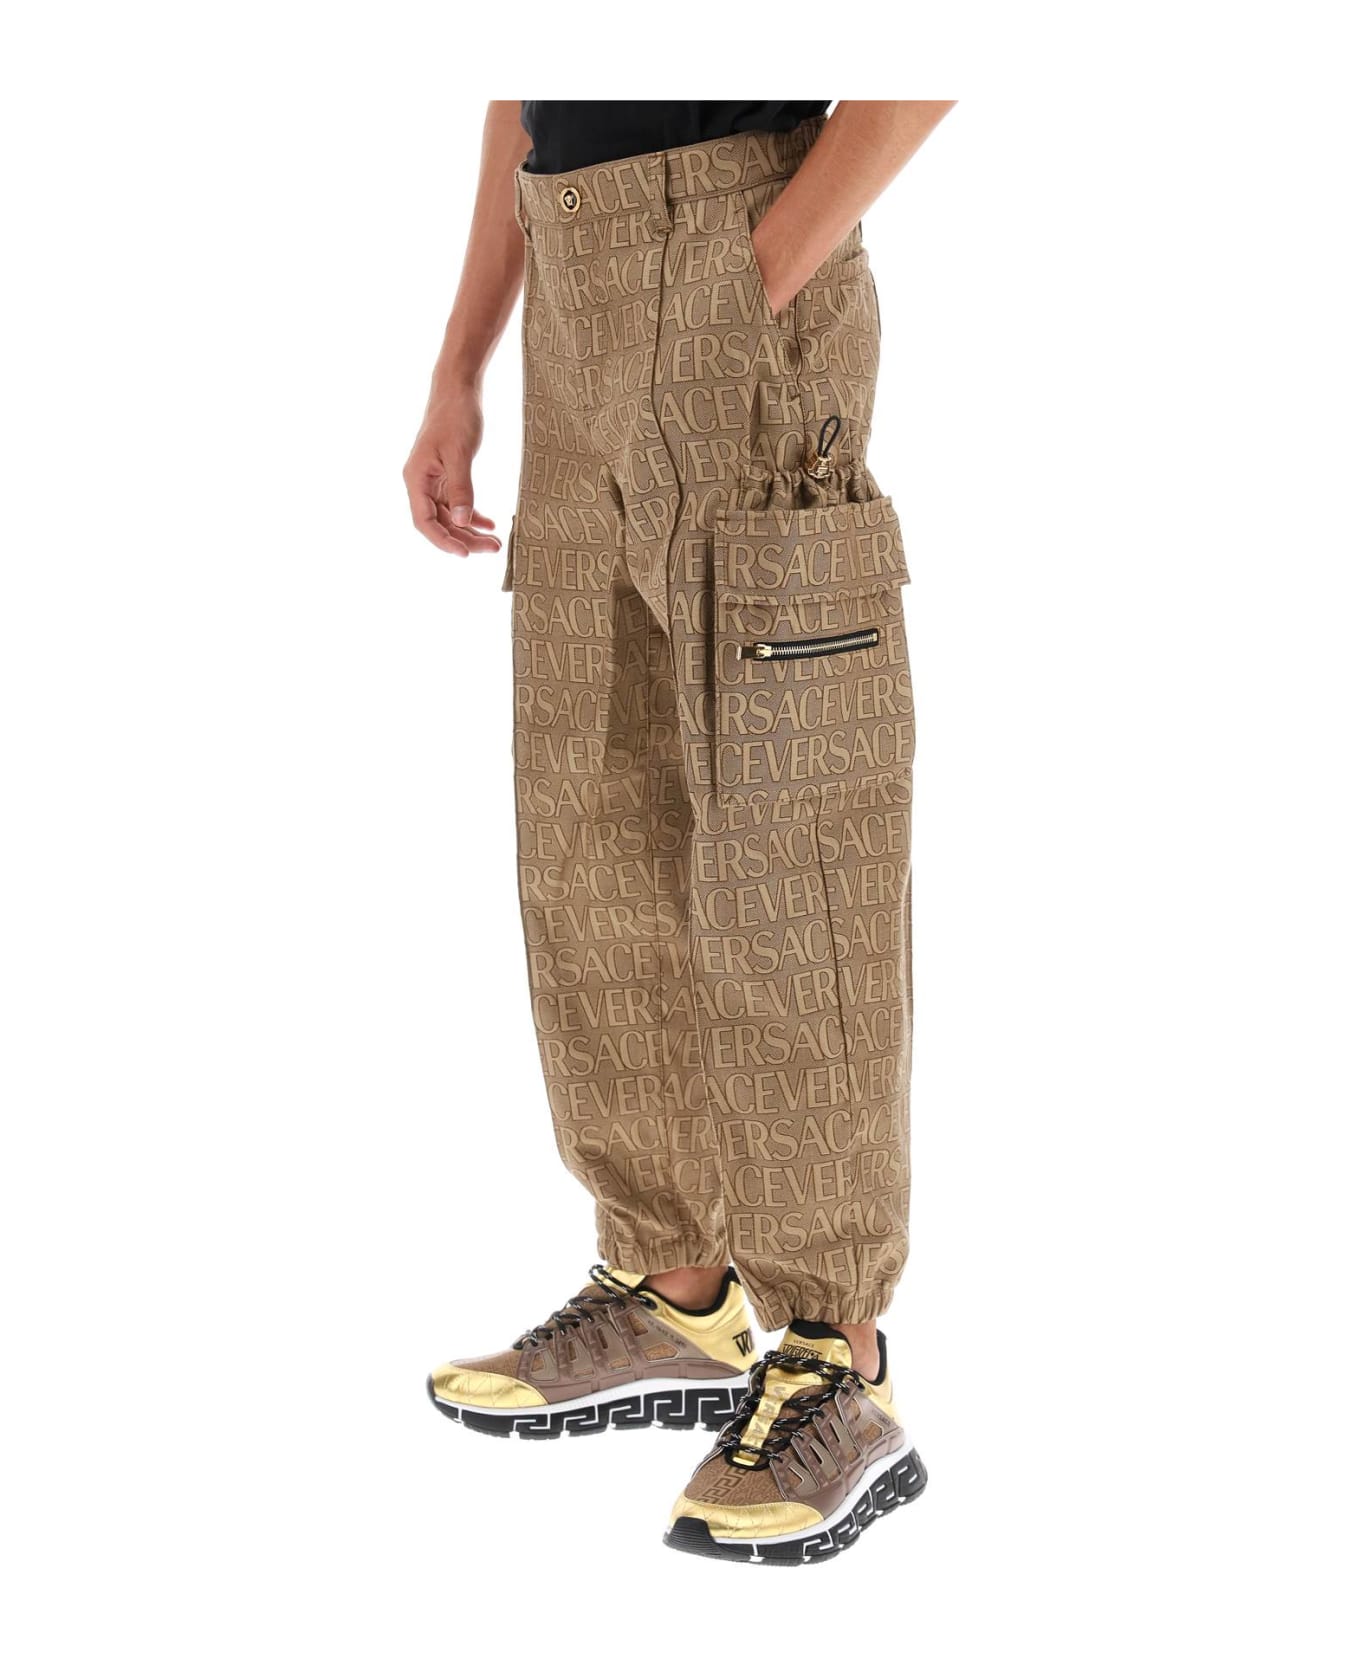 Versace 'versace All Over' Cargo Trousers - Brown ボトムス